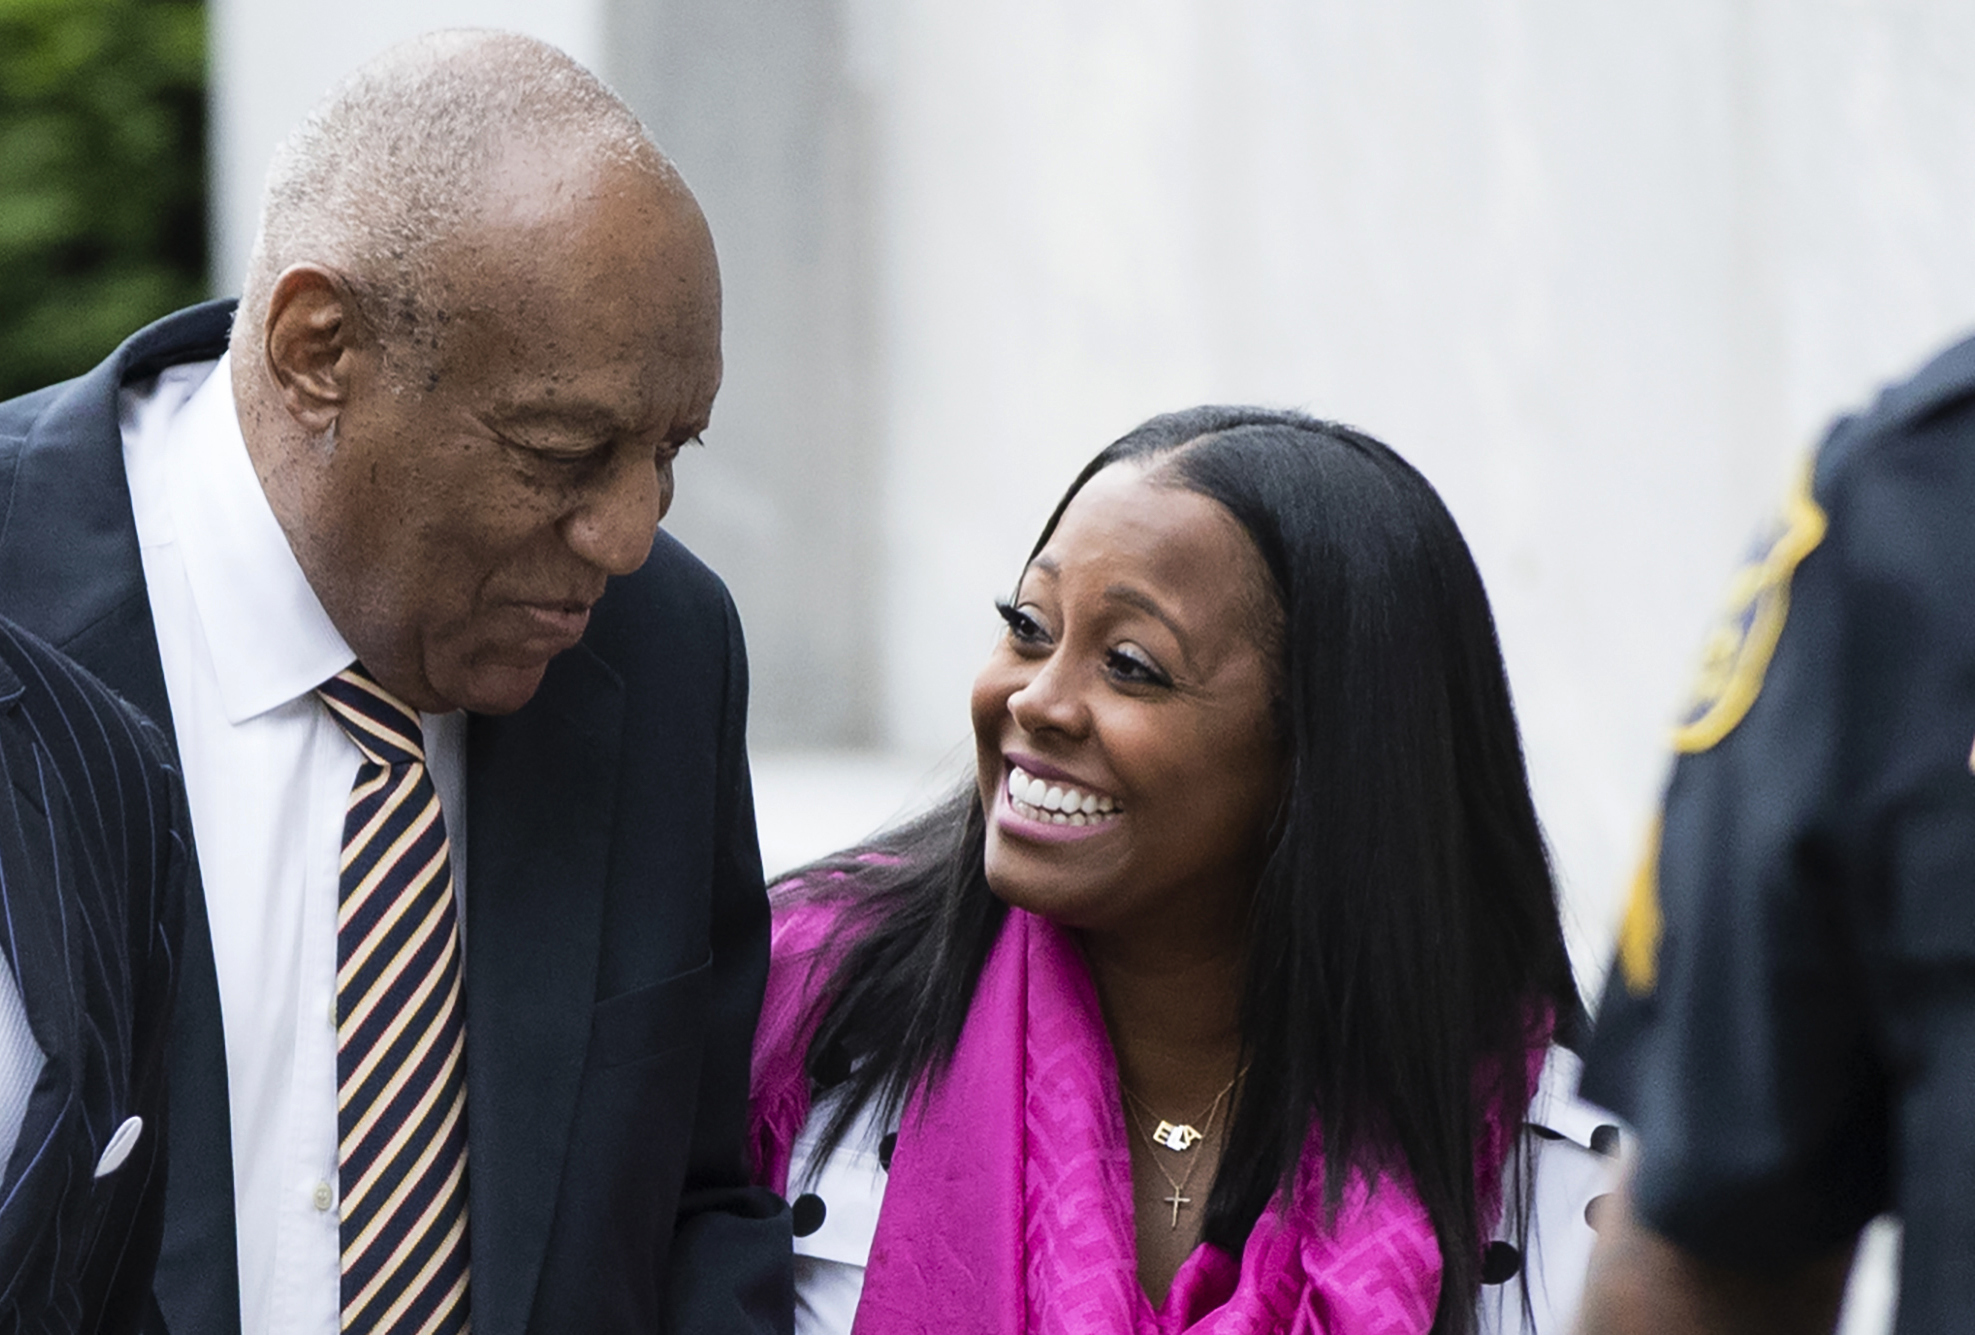 PHOTO: Bill Cosby arrives for his sexual assault trial with Keshia Knight Pulliam, right, at the Montgomery County Courthouse in Norristown, Pa., June 5, 2017.